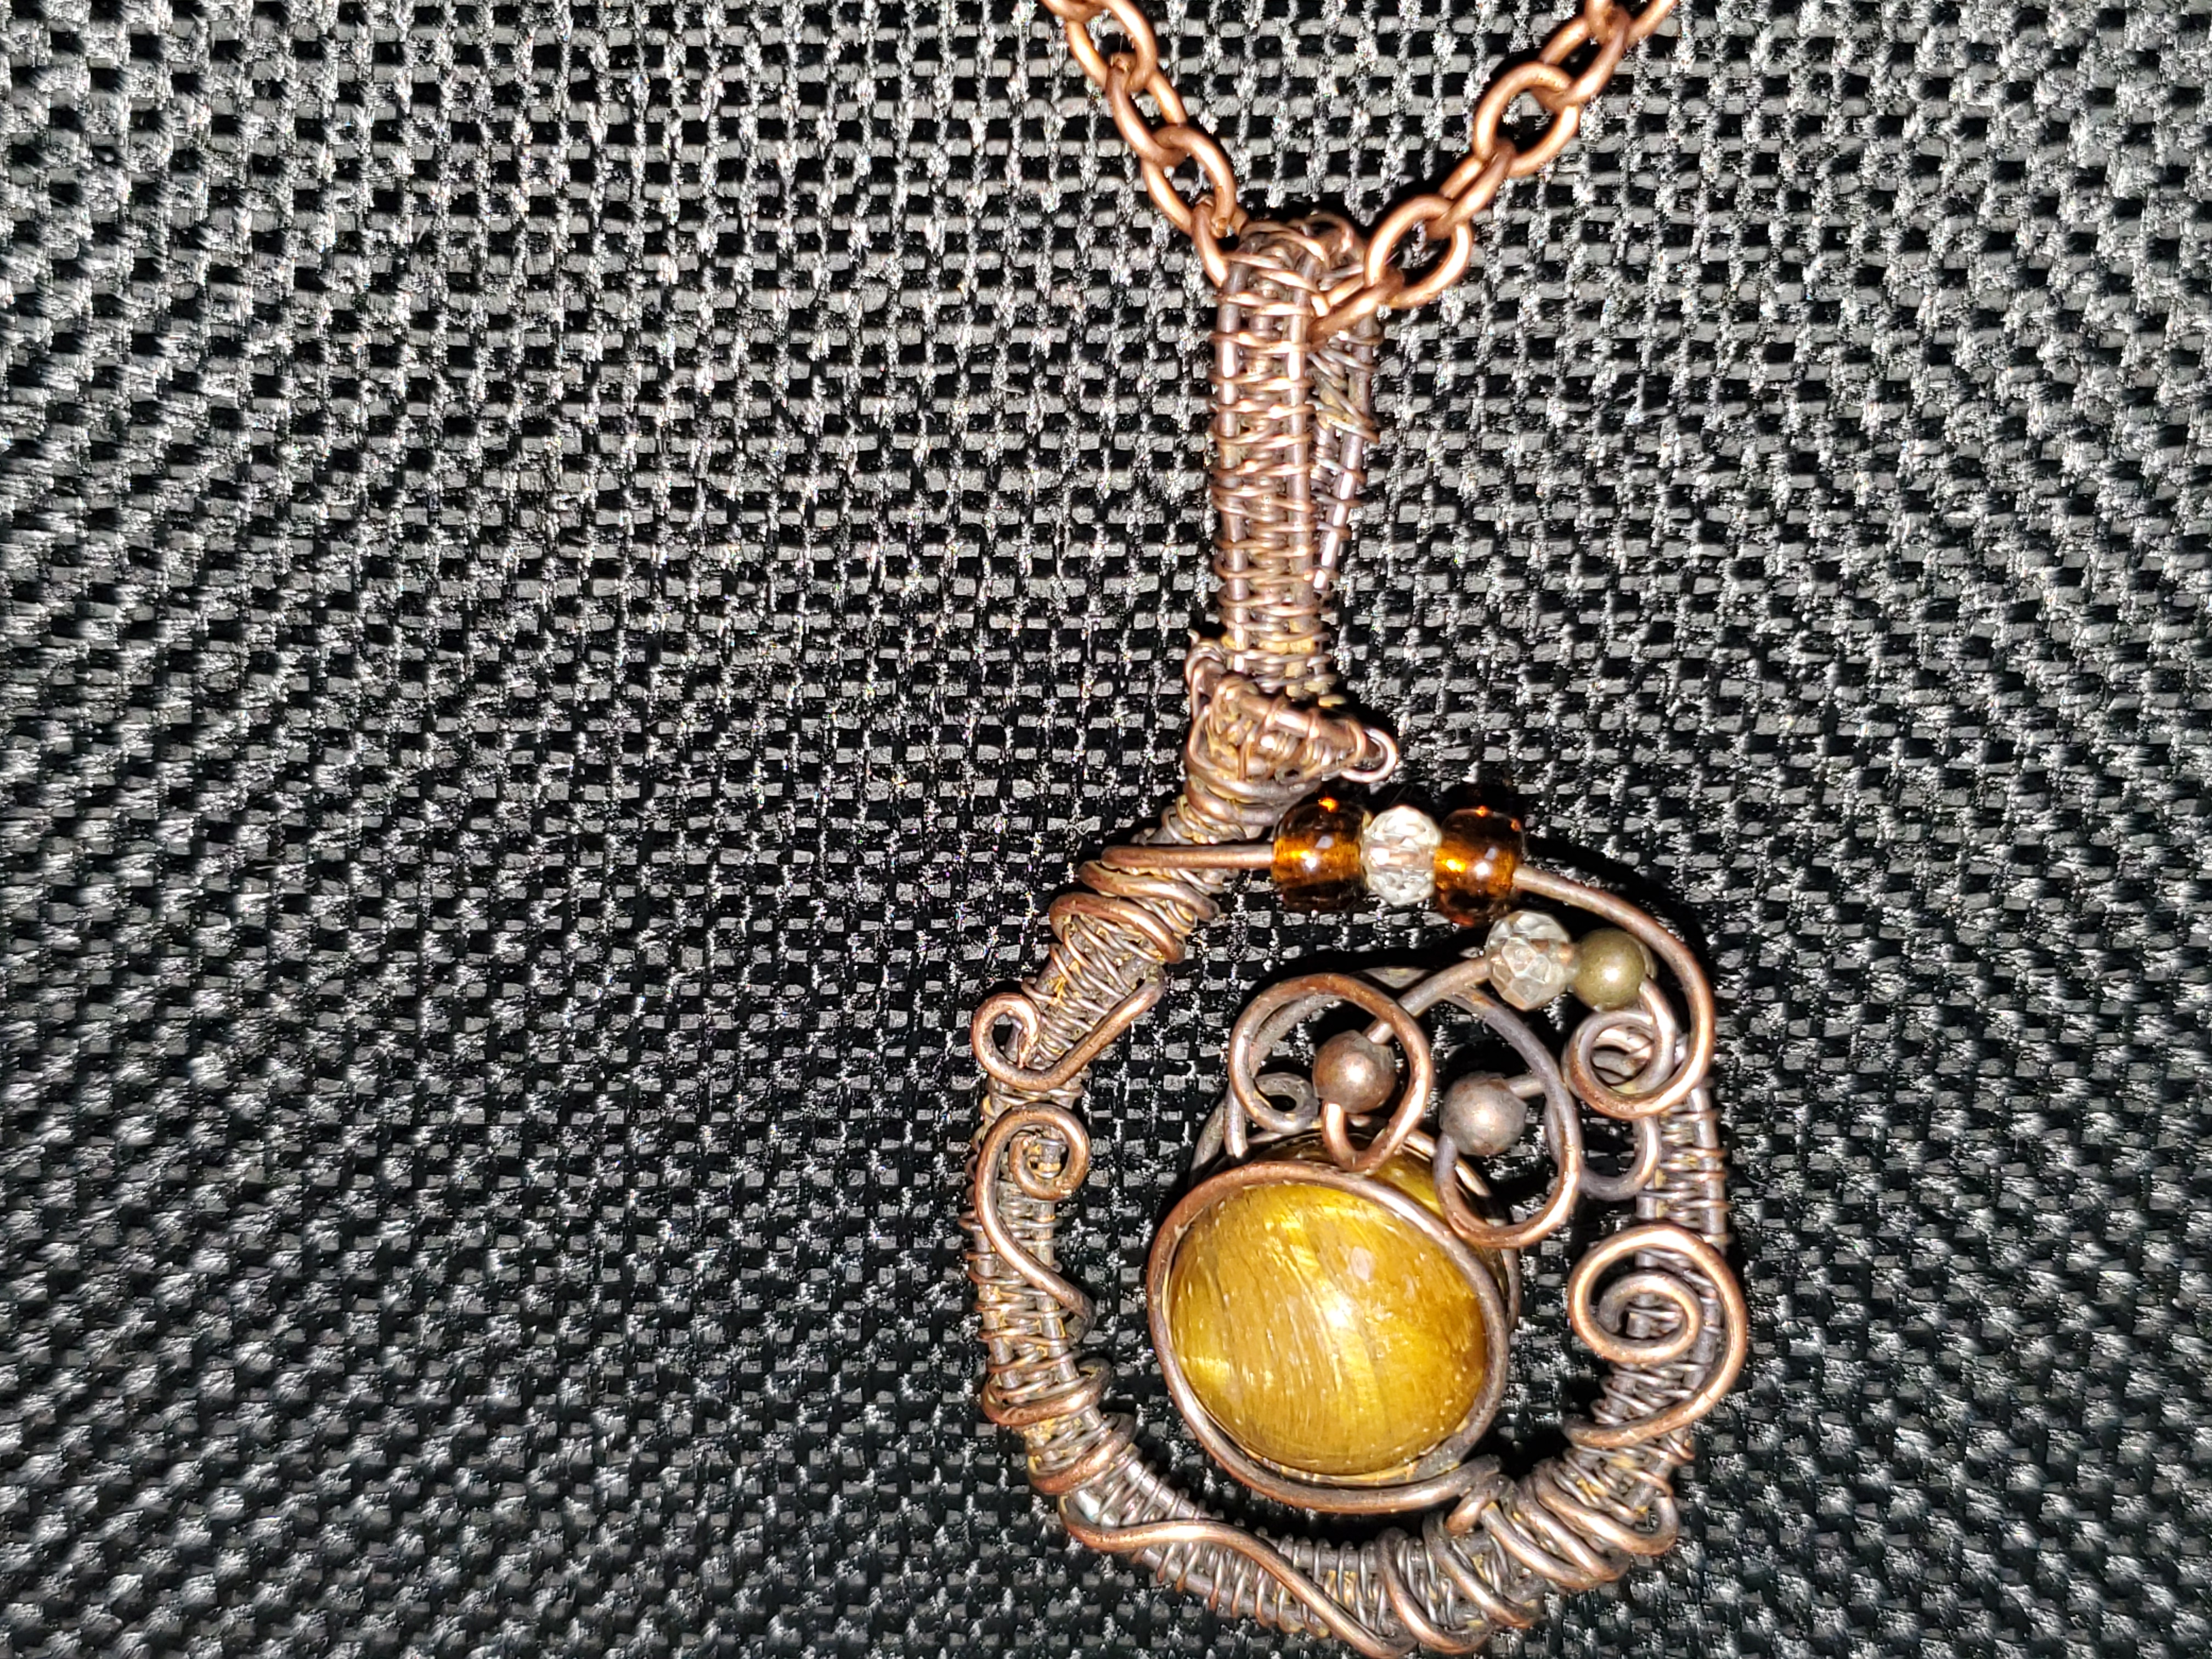 Tiger's Eye, tigers eye, tiger's eye necklace, charm, pendant, amulet, crystal, crystal jewely, stone, stone jewelry, wire, copper wire, wire wrapped, necklace, spiritual, healing, semi precious, art, handcrafted, unique gift, magical pendant